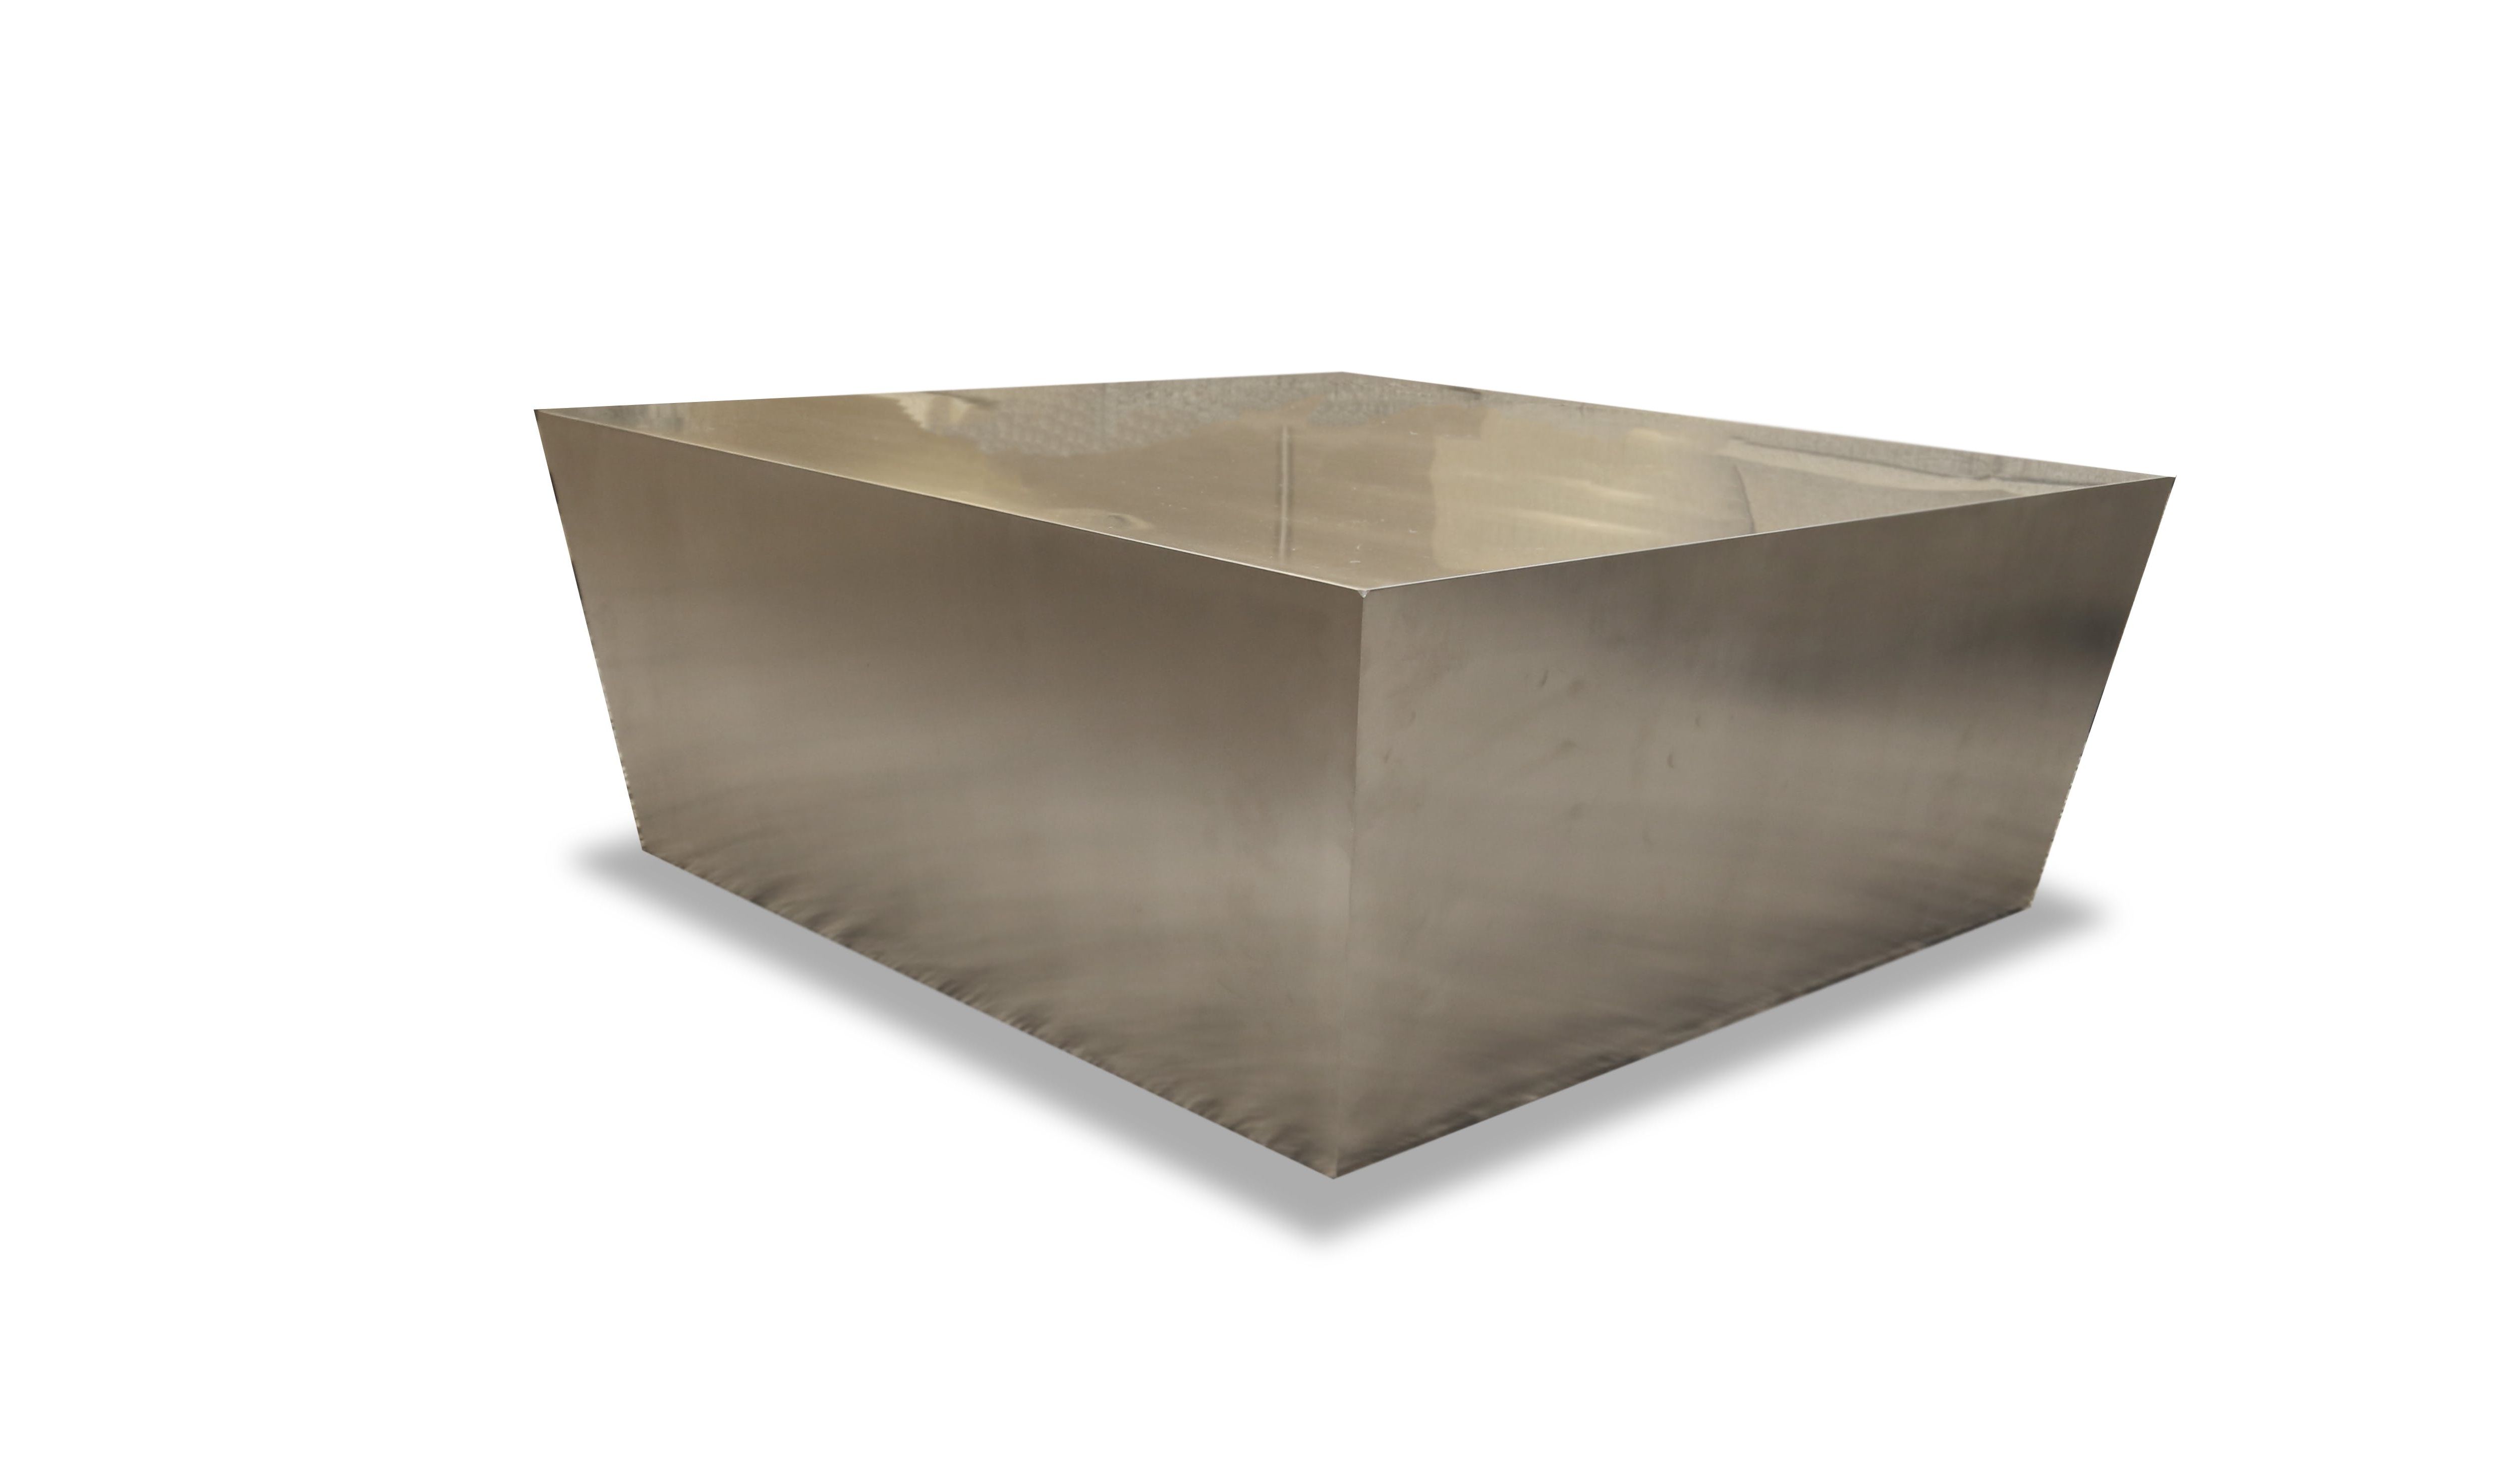 2019 Carbon Loft Kenyon Natural Rustic Coffee Tables With Regard To Cube Coffee Table, Polished Stainless Nuevo Living Furniture (View 16 of 20)